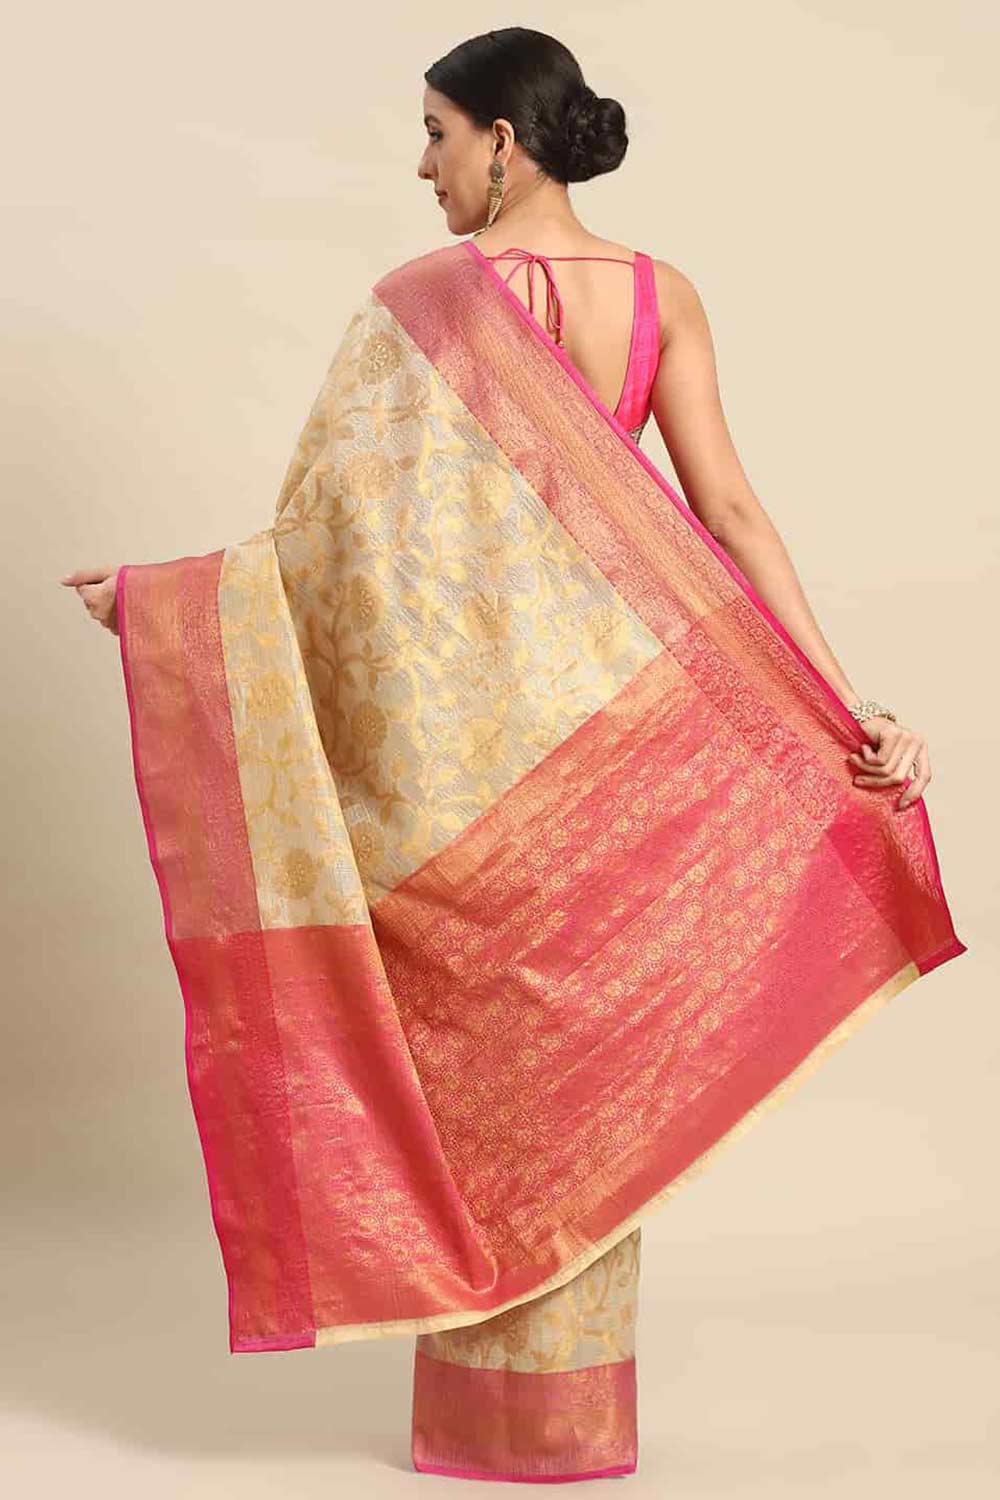 Shop Priya Beige Tusser Art Silk Floral Banarasi One Minute Saree at best offer at our  Store - One Minute Saree